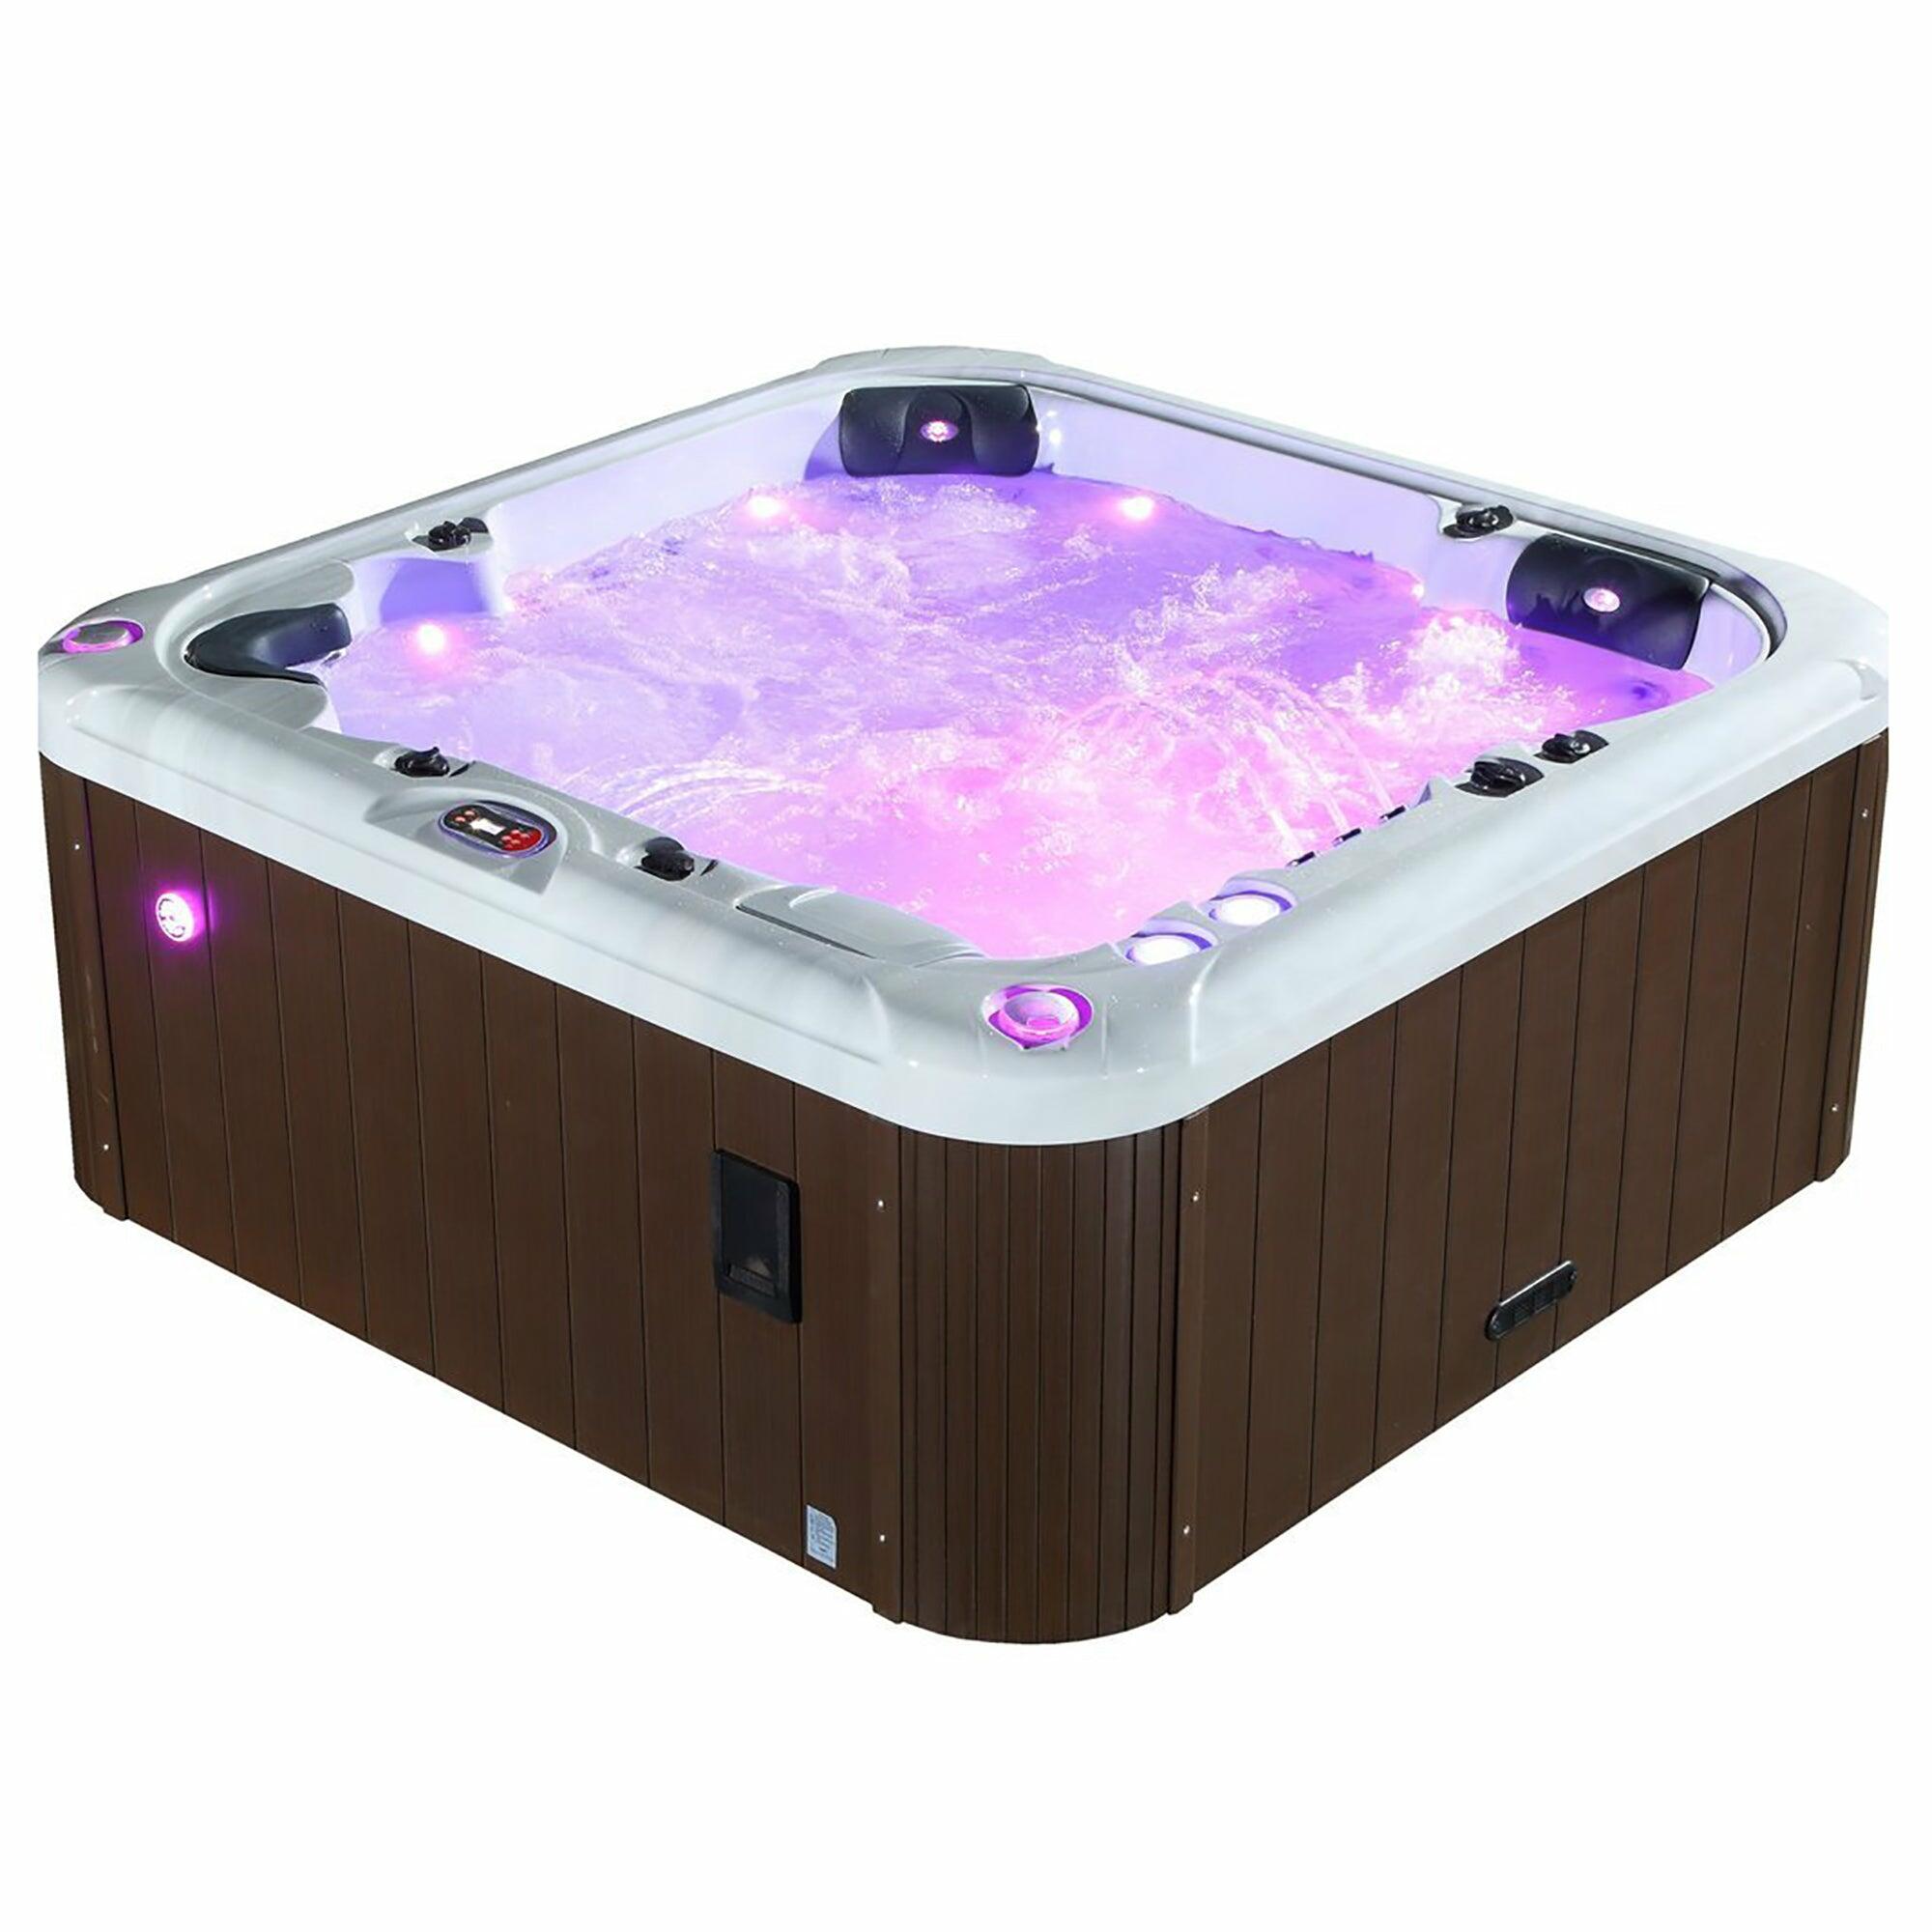 An image of Canadian Spa London Se 44 Jet 6 Person Hot Tub